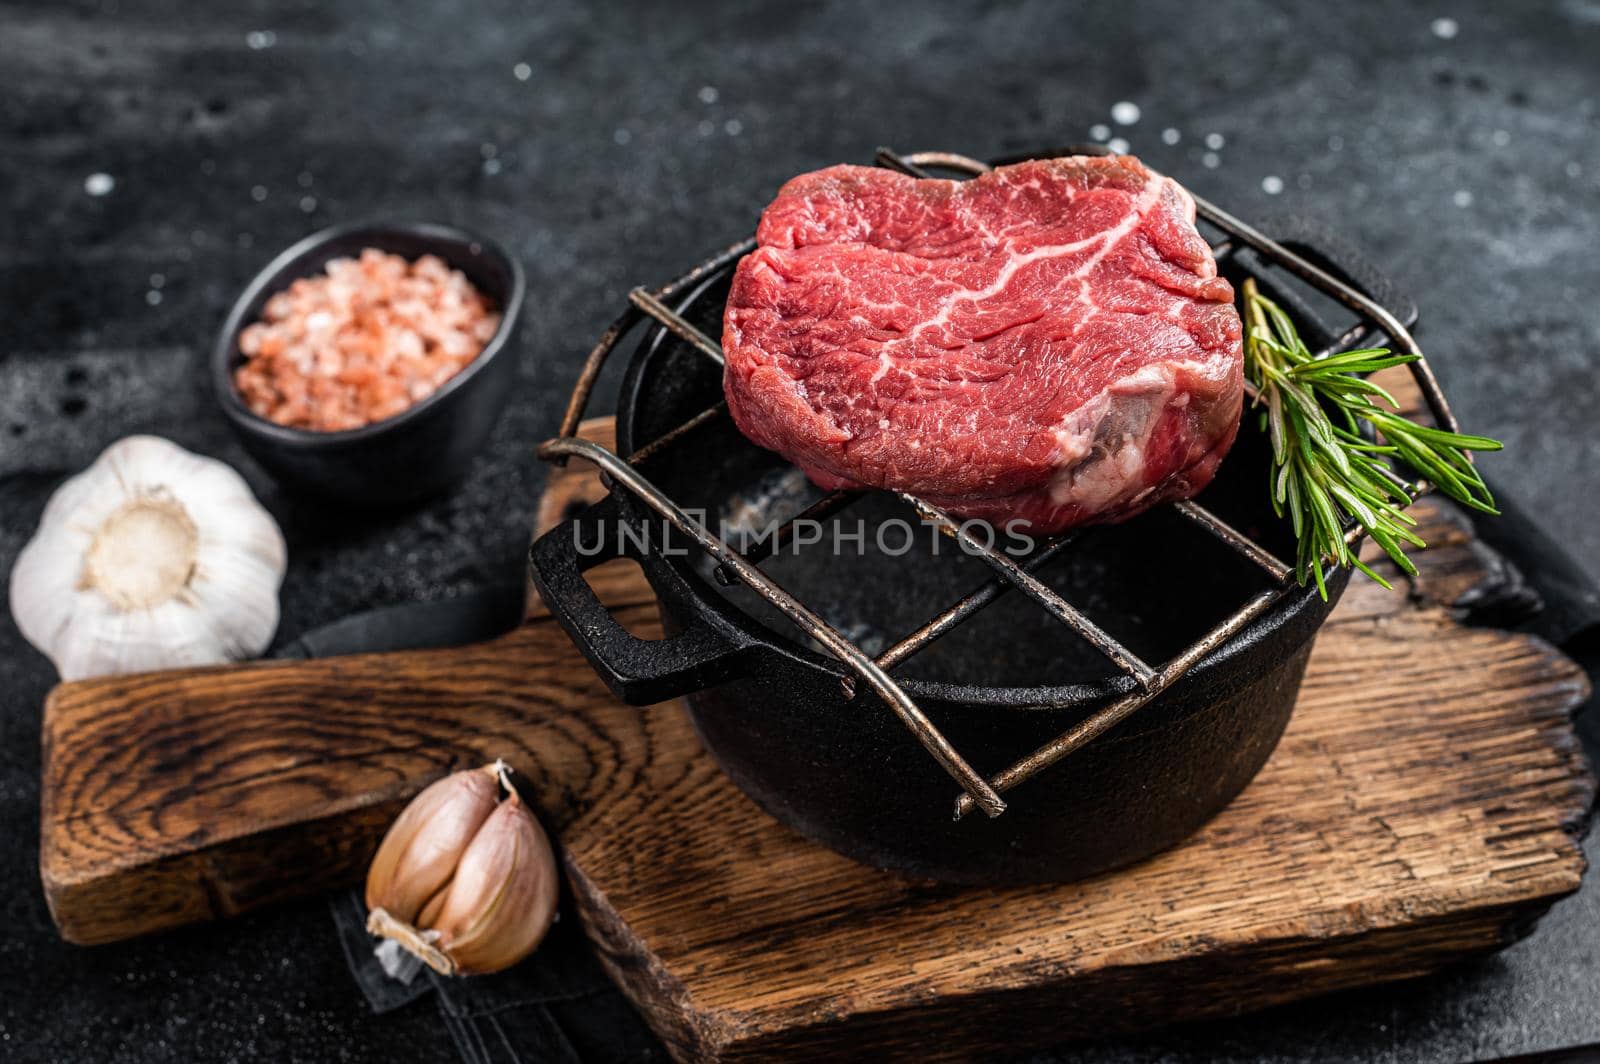 Raw fillet mignon beef steak on a grill with herbs. Black background. Top view by Composter